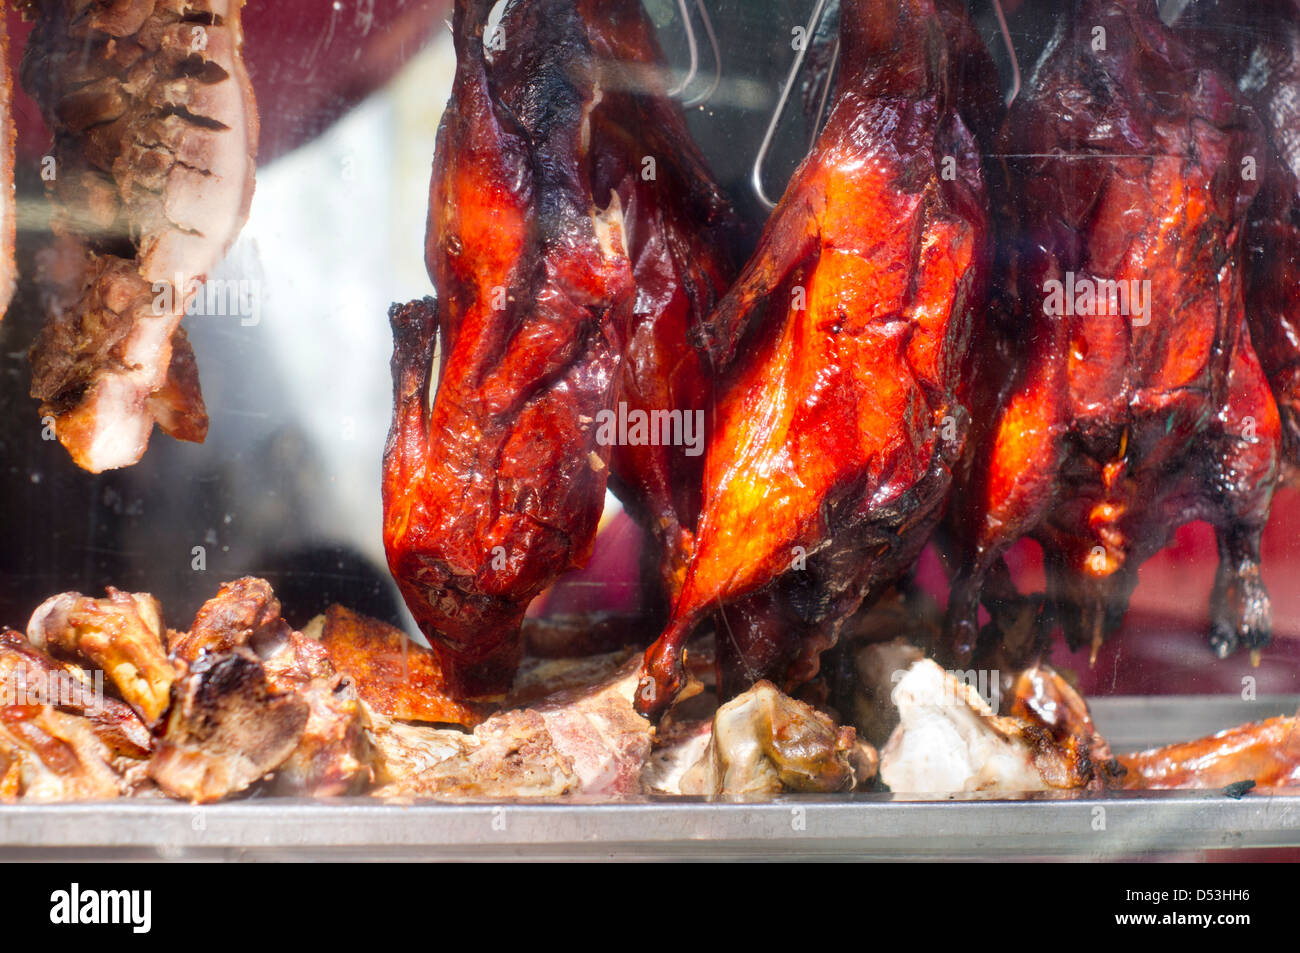 roasted duck on sale in Malaysia. Common chinese food in asia. Stock Photo